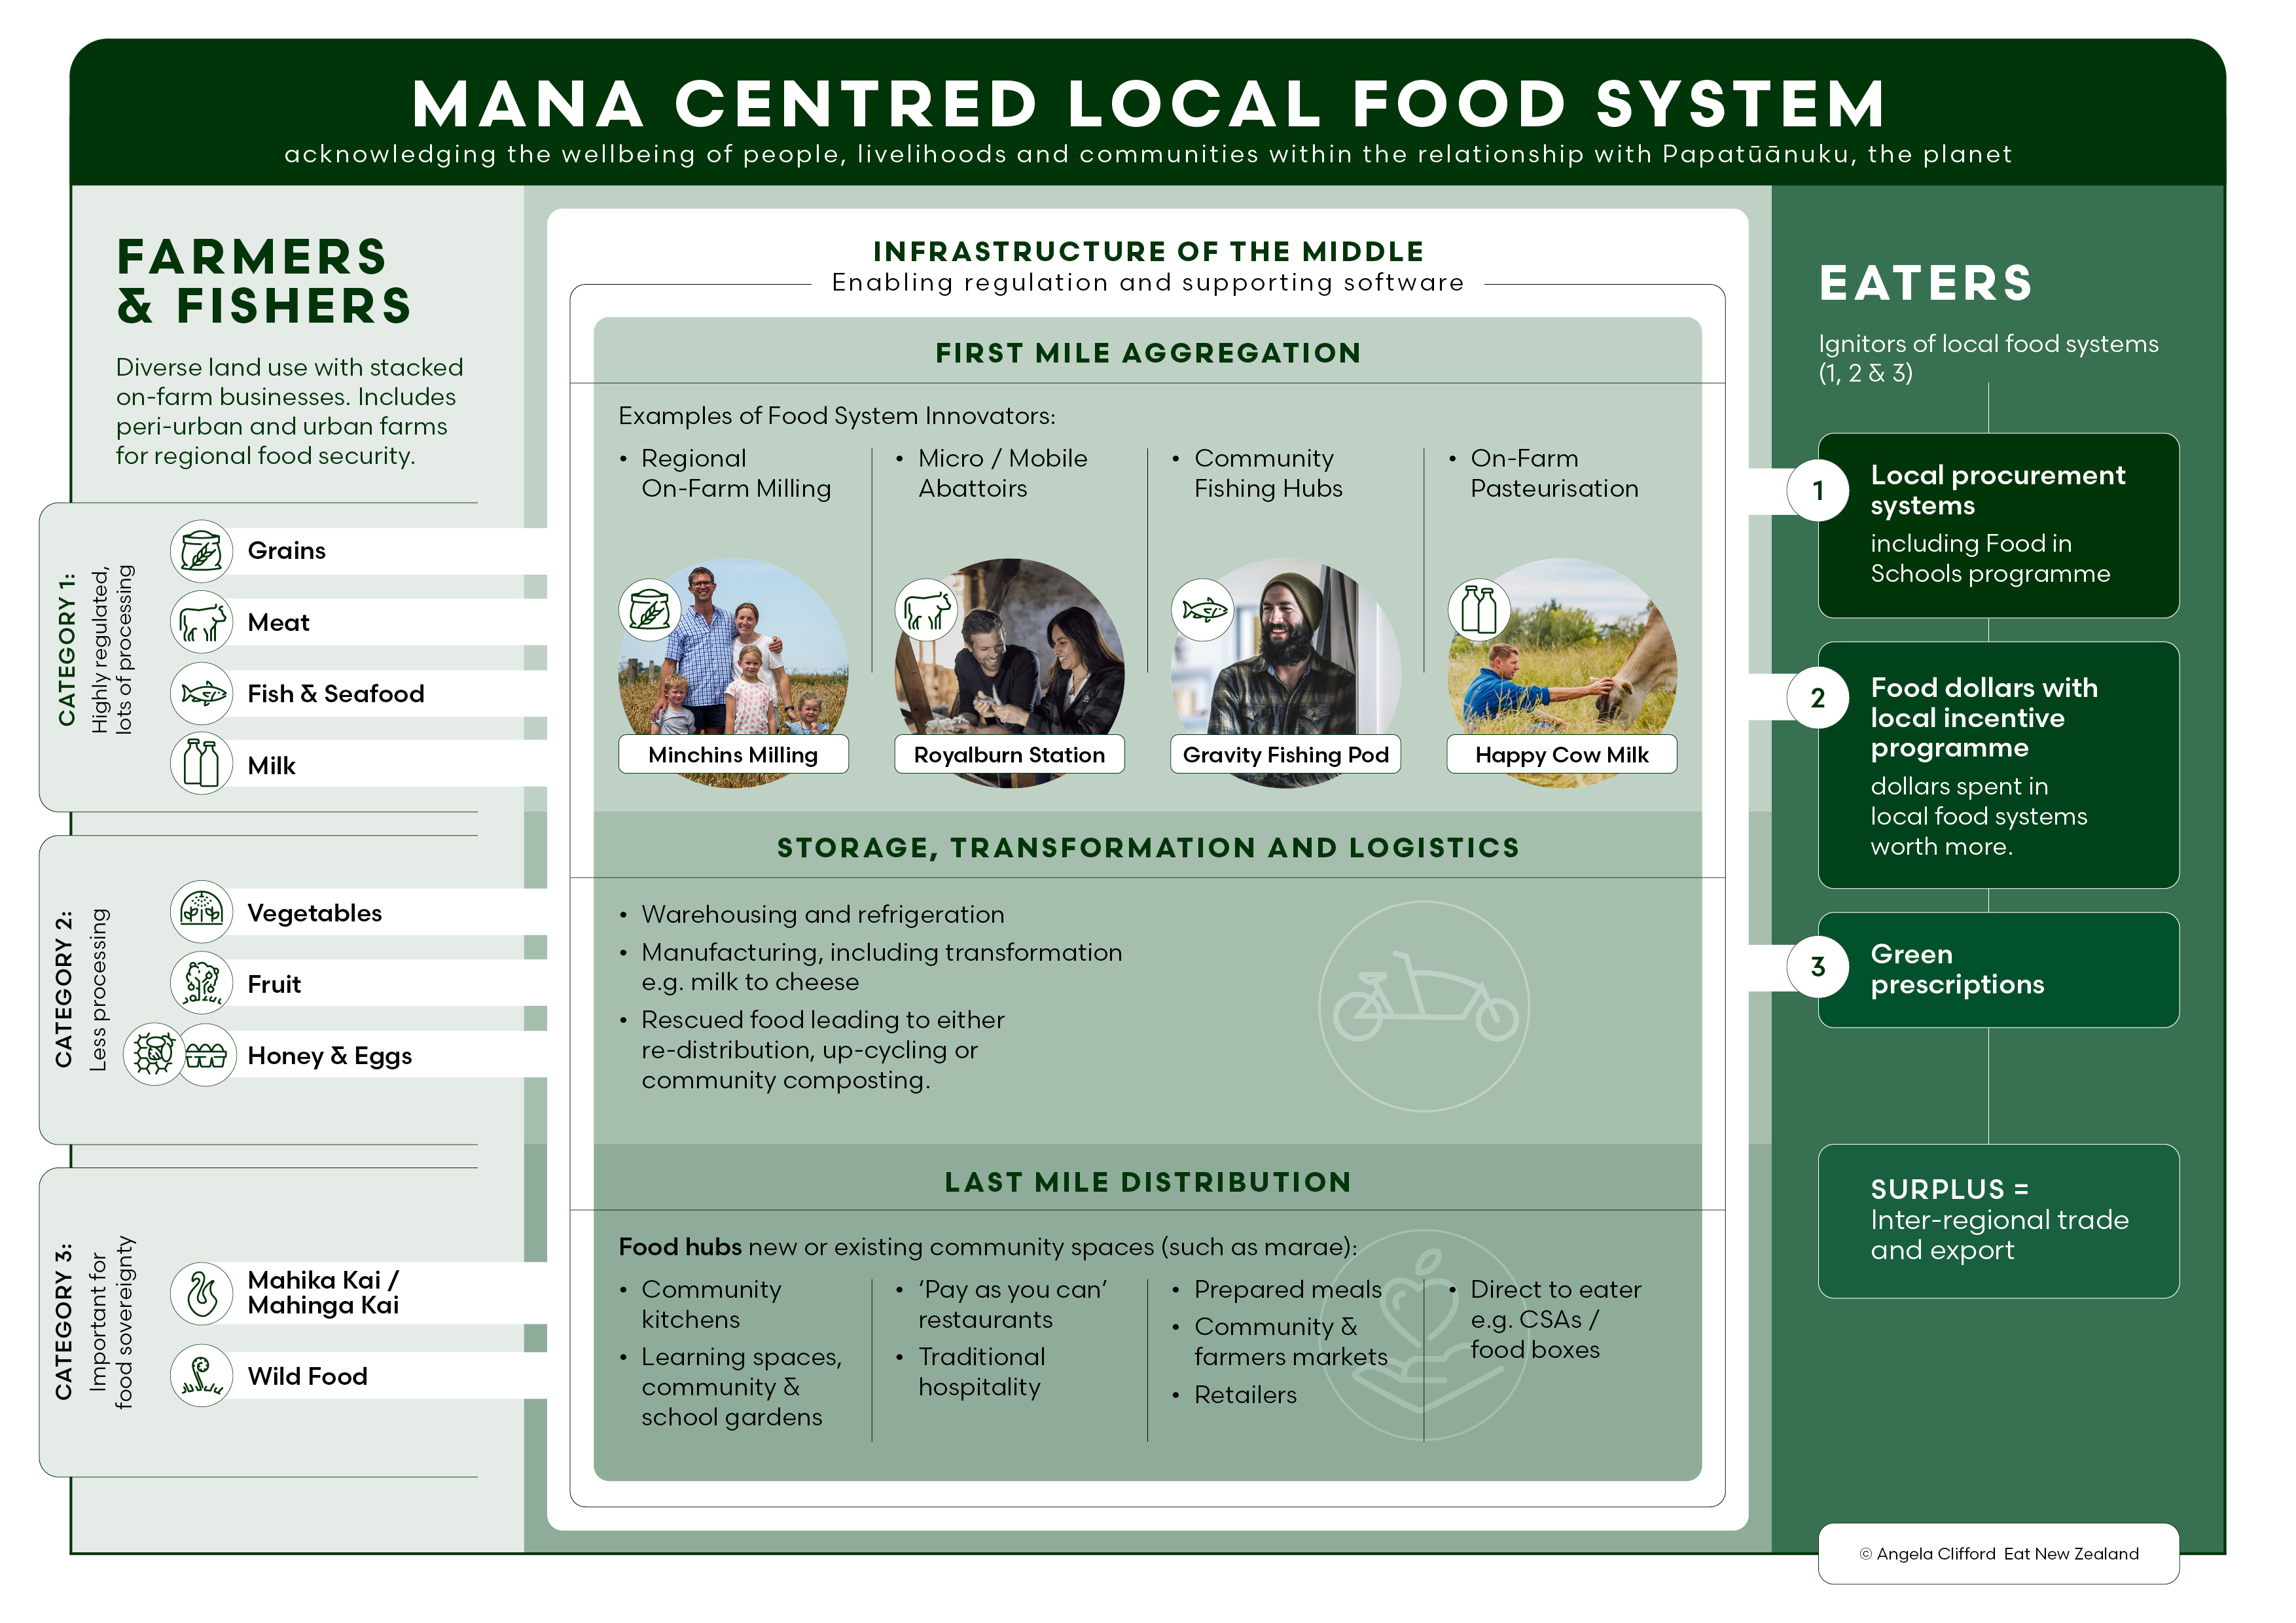 Launching the Mana-Centred Local Food System Model